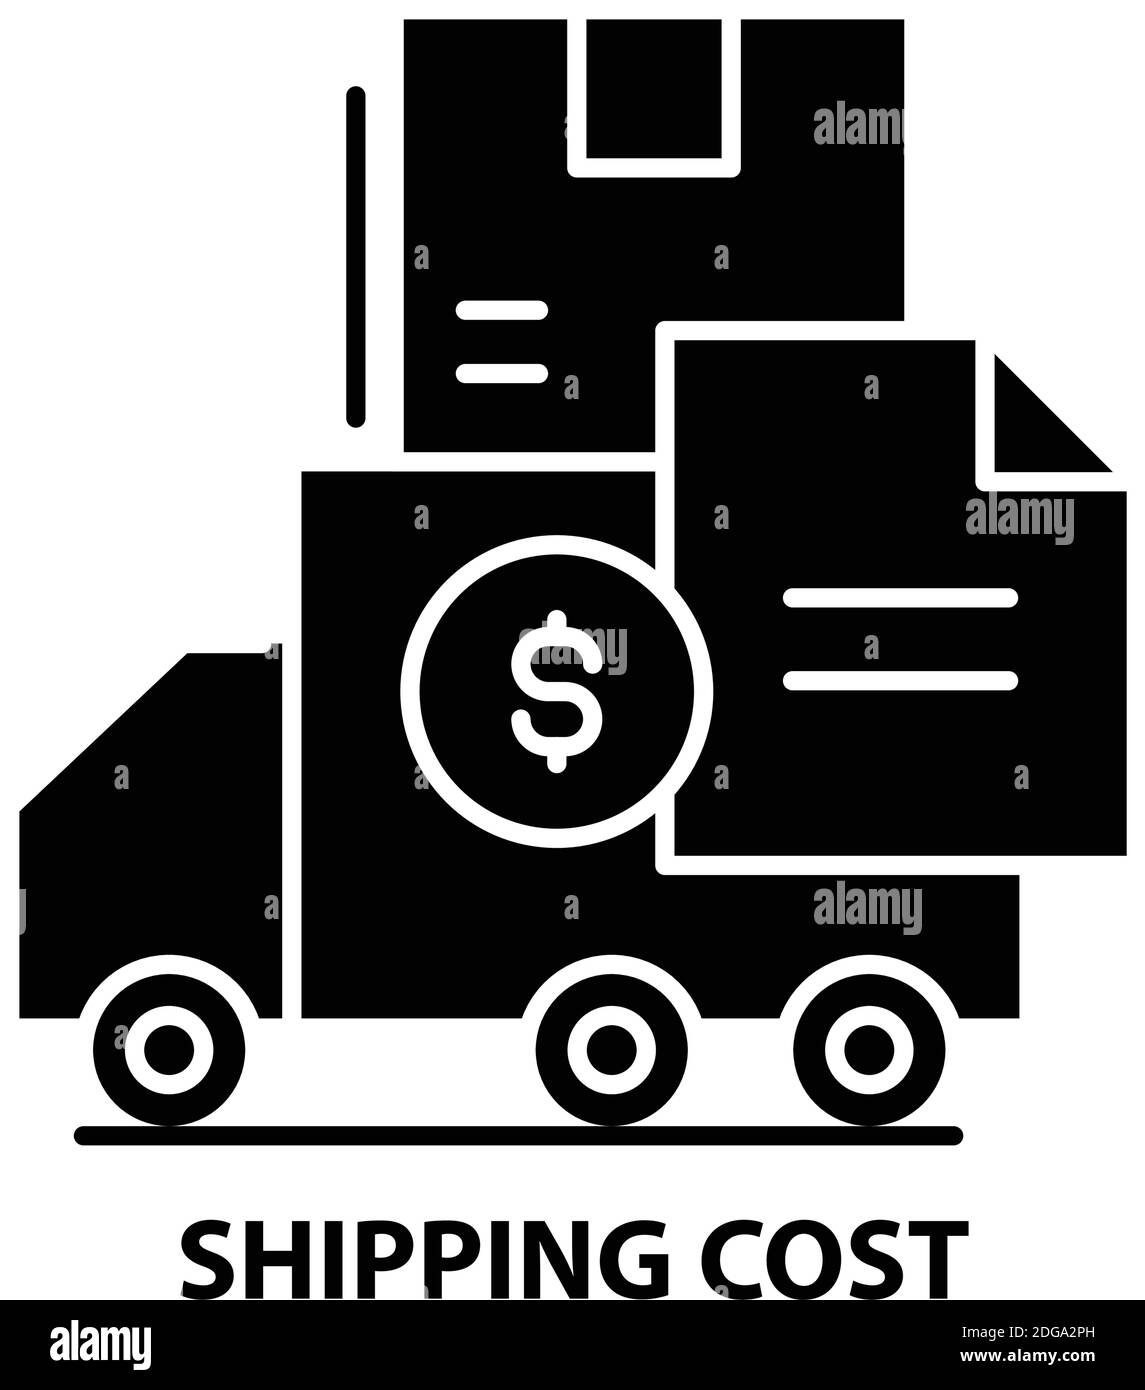 shipping cost icon, black vector sign with editable strokes, concept illustration Stock Vector